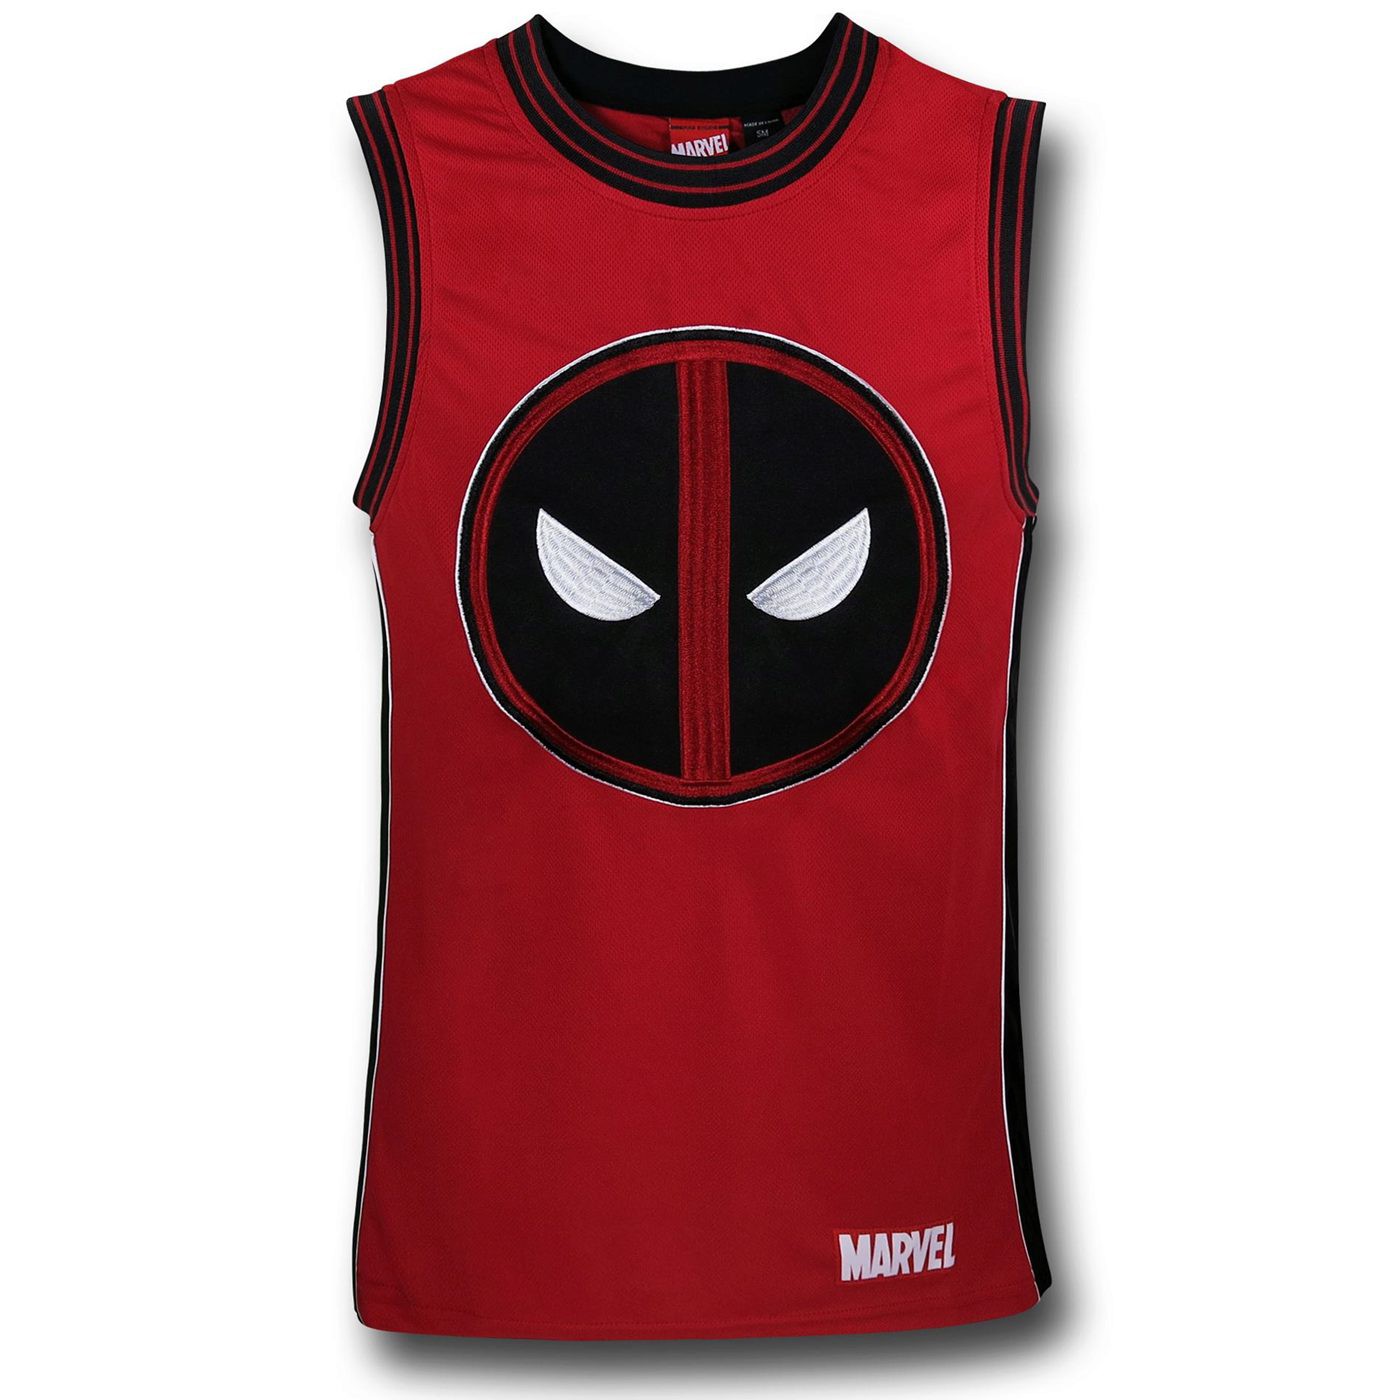 Deadpool Embroidered Basketball Jersey